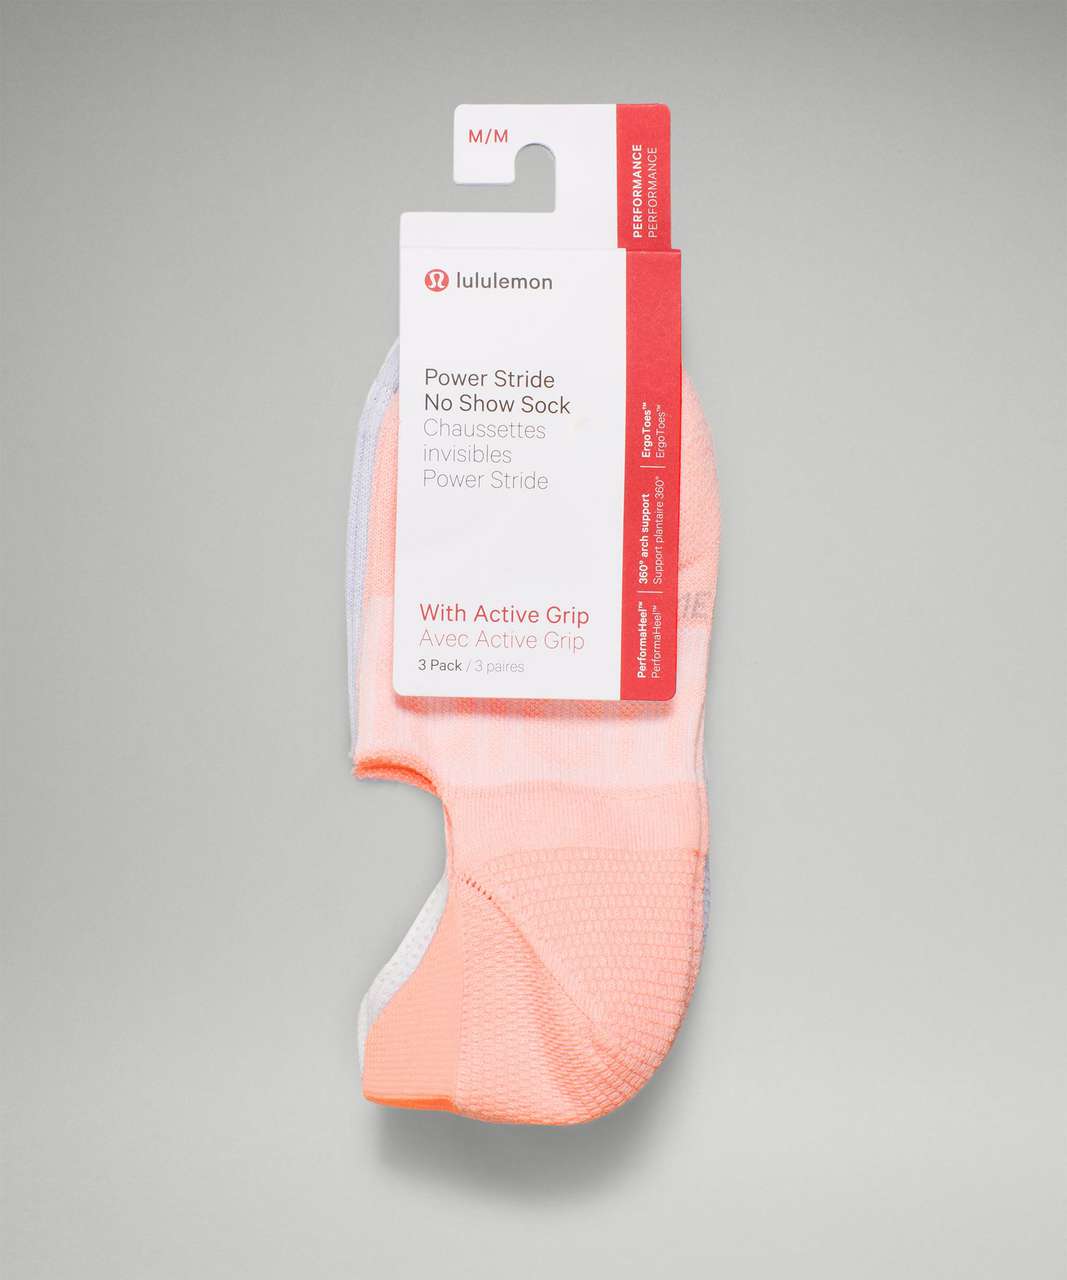 Lululemon Power Stride No-Show Sock with Active Grip 3 Pack - Dew Pink / Pastel Blue / White